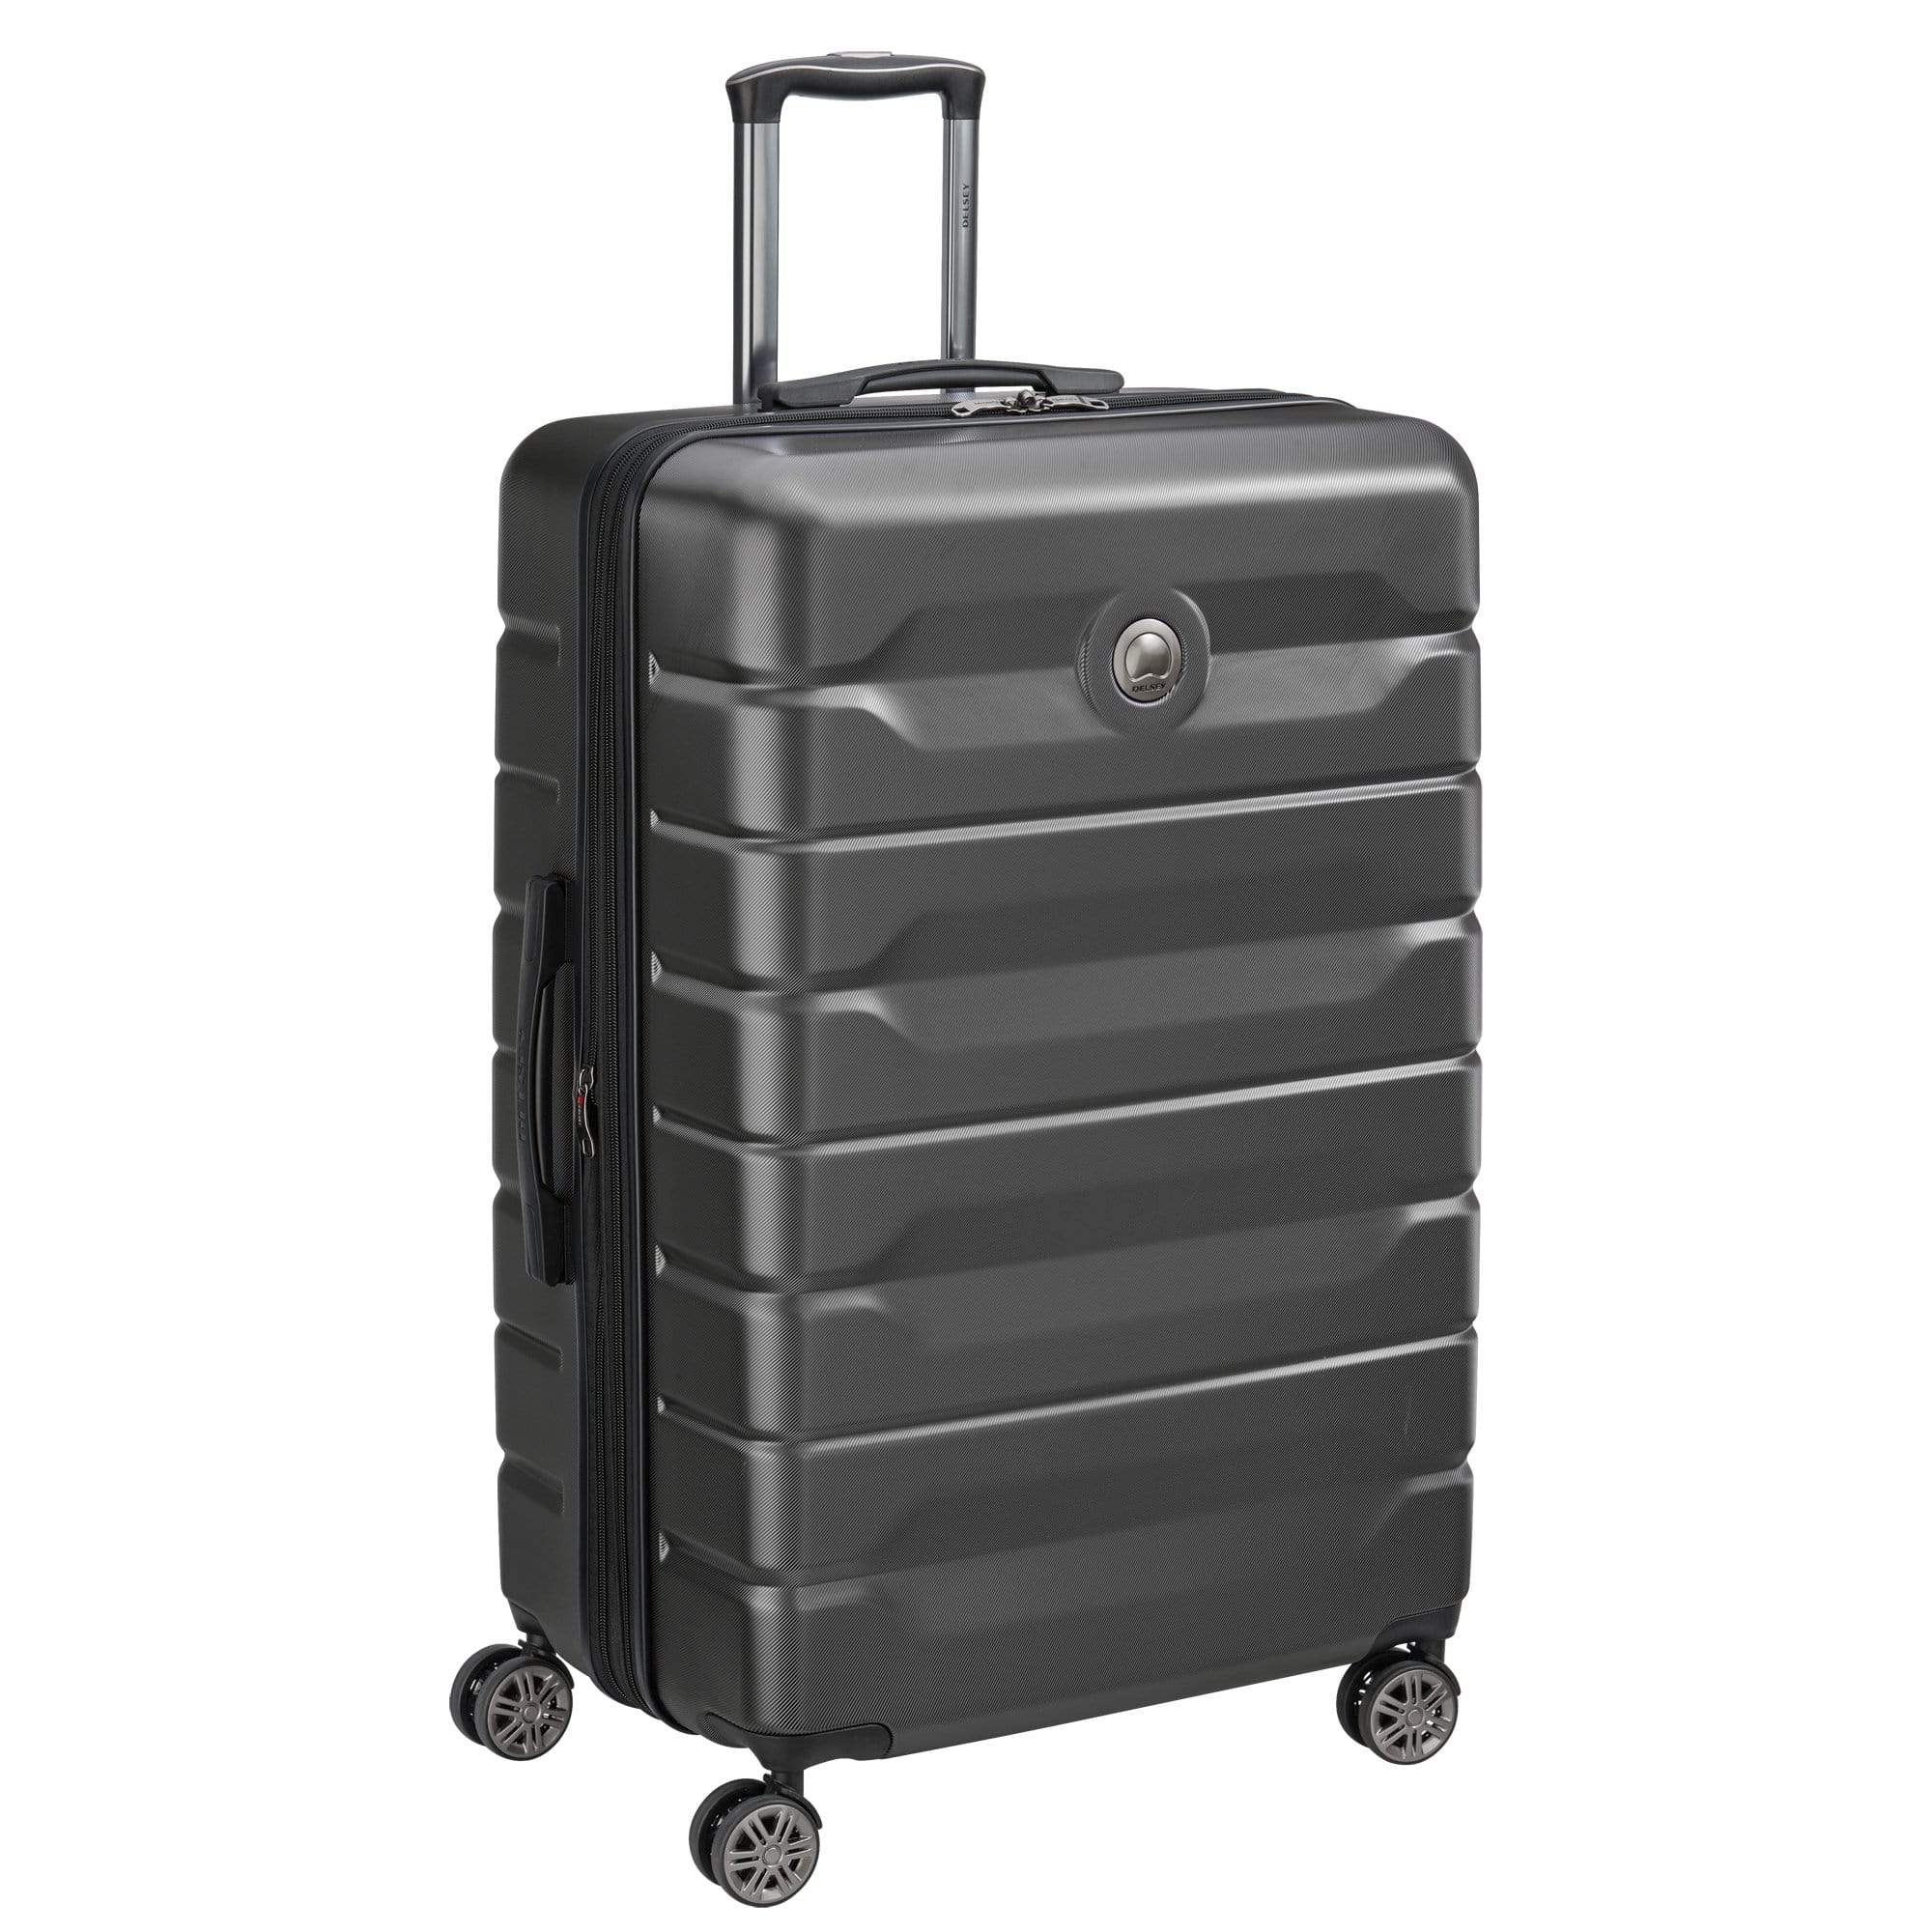 Delsey Air Armour 78.5cm Hardcase 4 Double Wheel Expandable Check-In Luggage Trolley Black - 00386683000T9